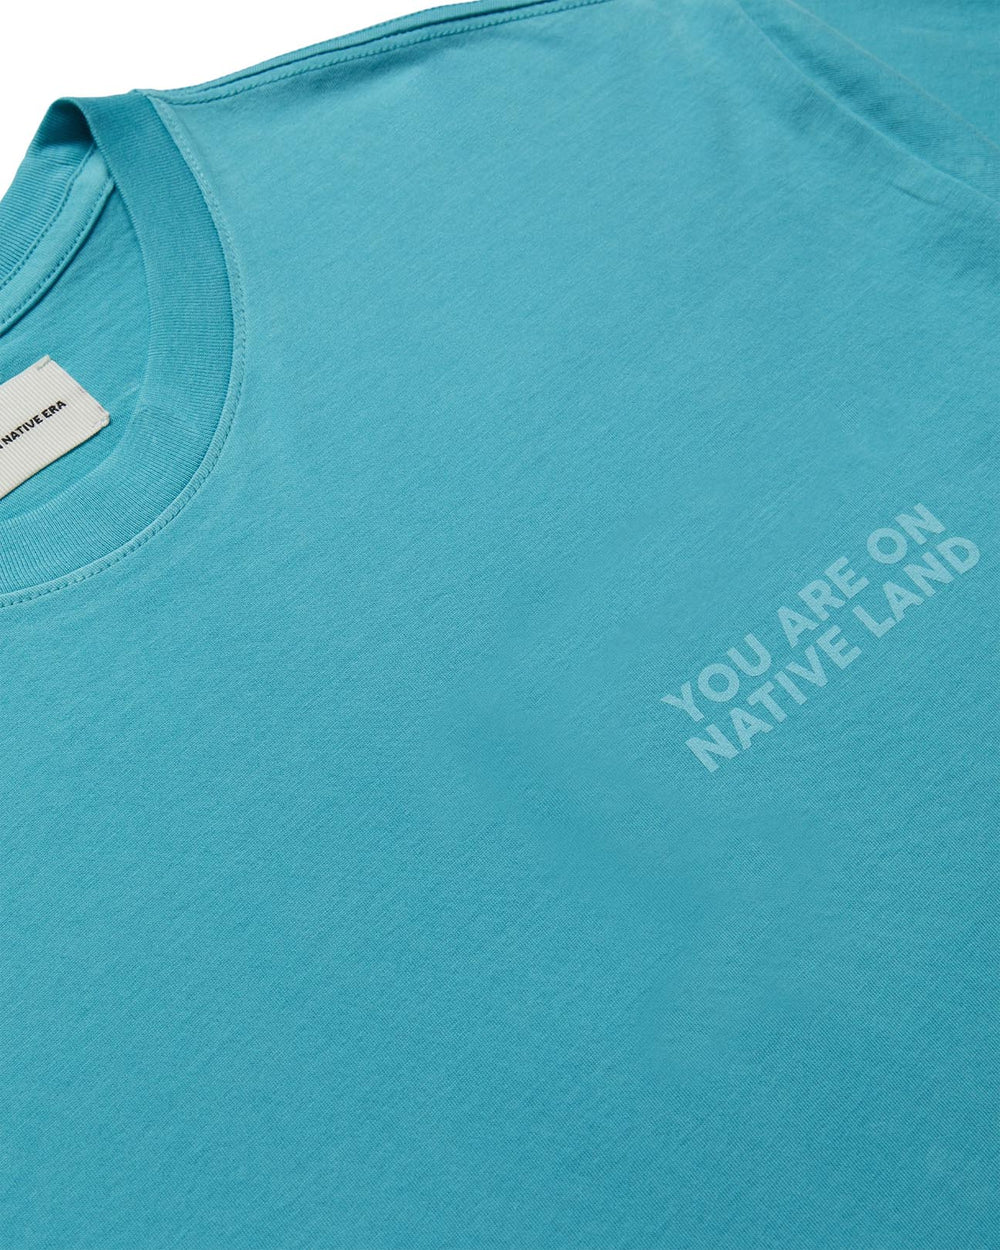 'YOU ARE ON NATIVE LAND' EVERYDAY TEE - TURQUOISE TONIC